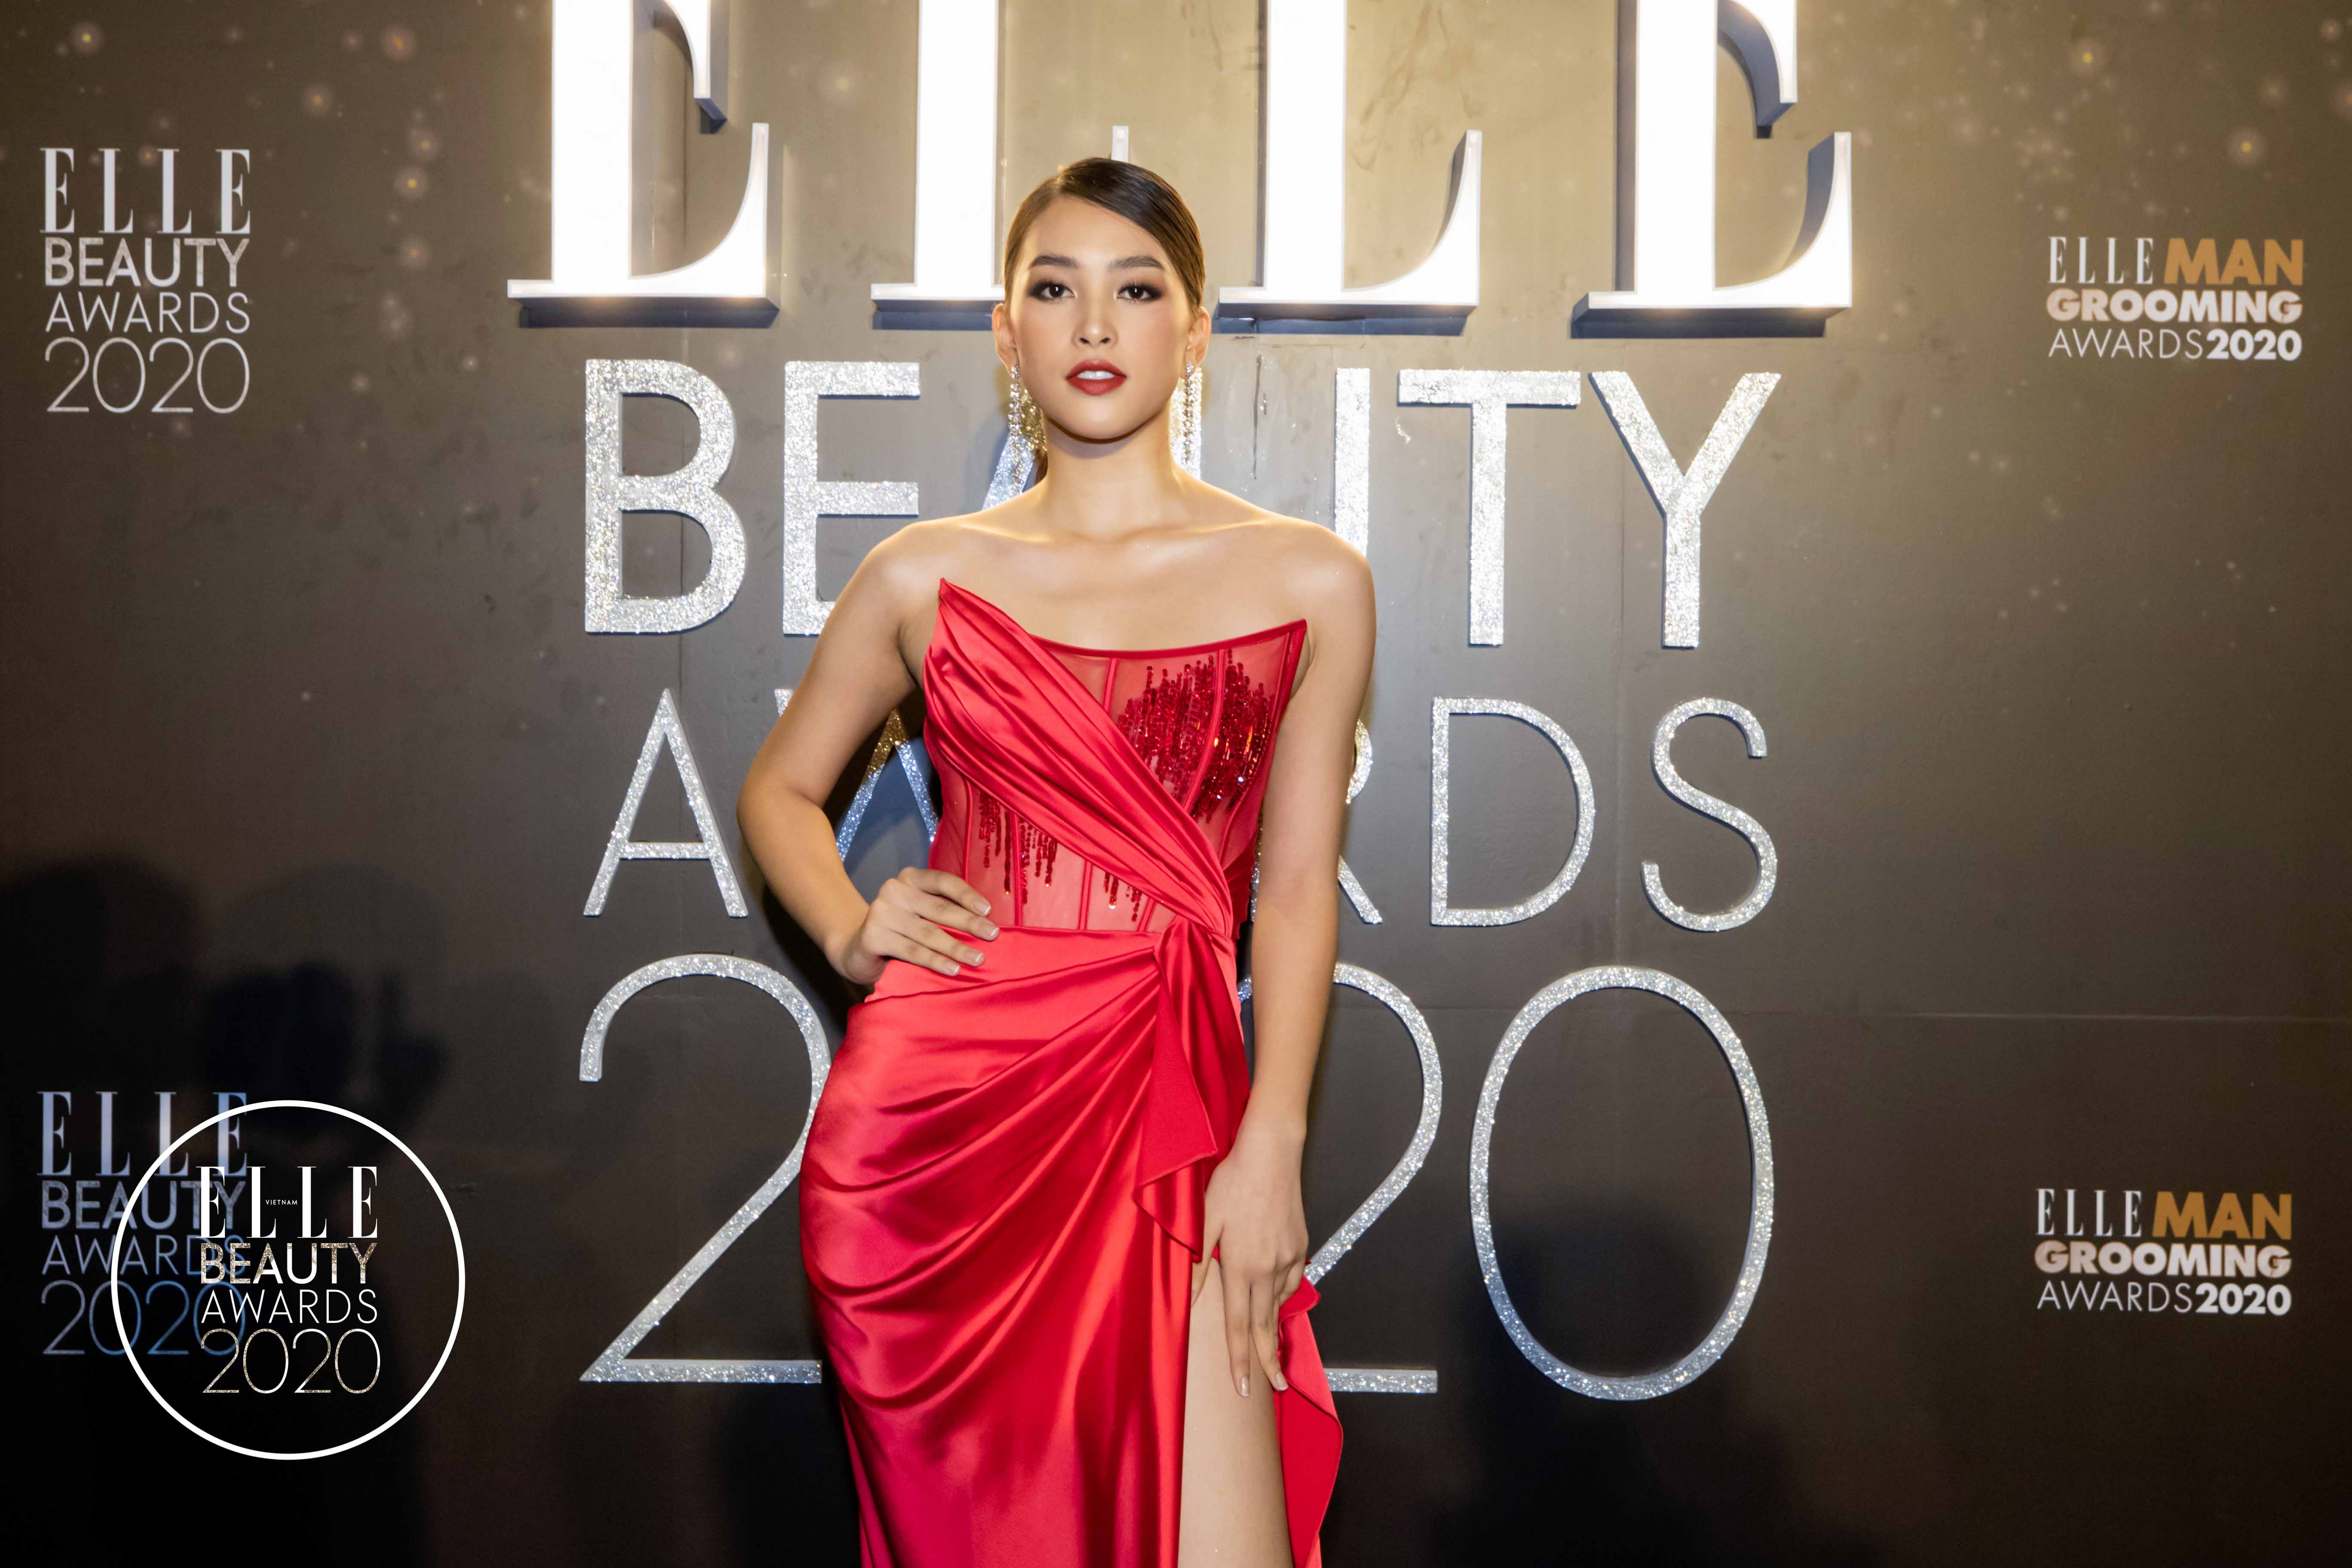 Danh hiệu Best Face of the Year của ELLE Beauty Awards 2020